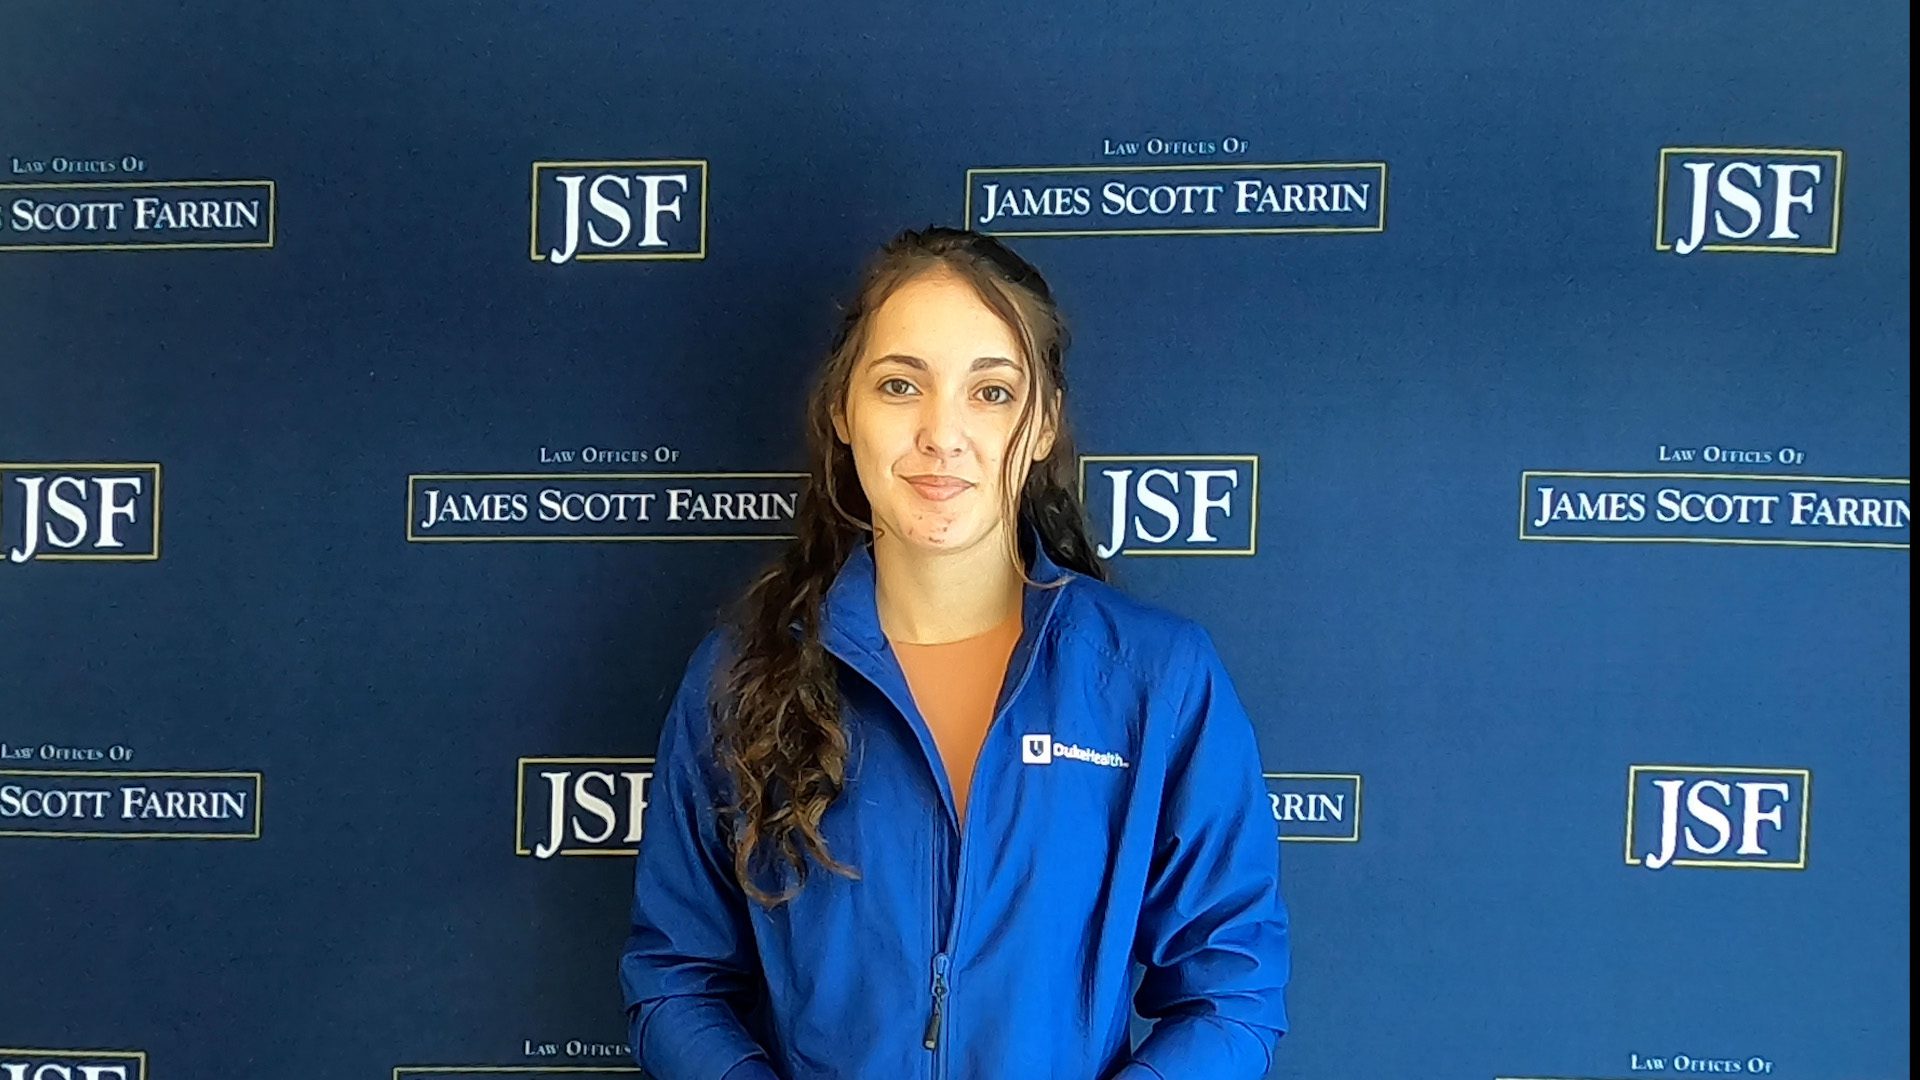 Client standing in front of a blue JSF background.